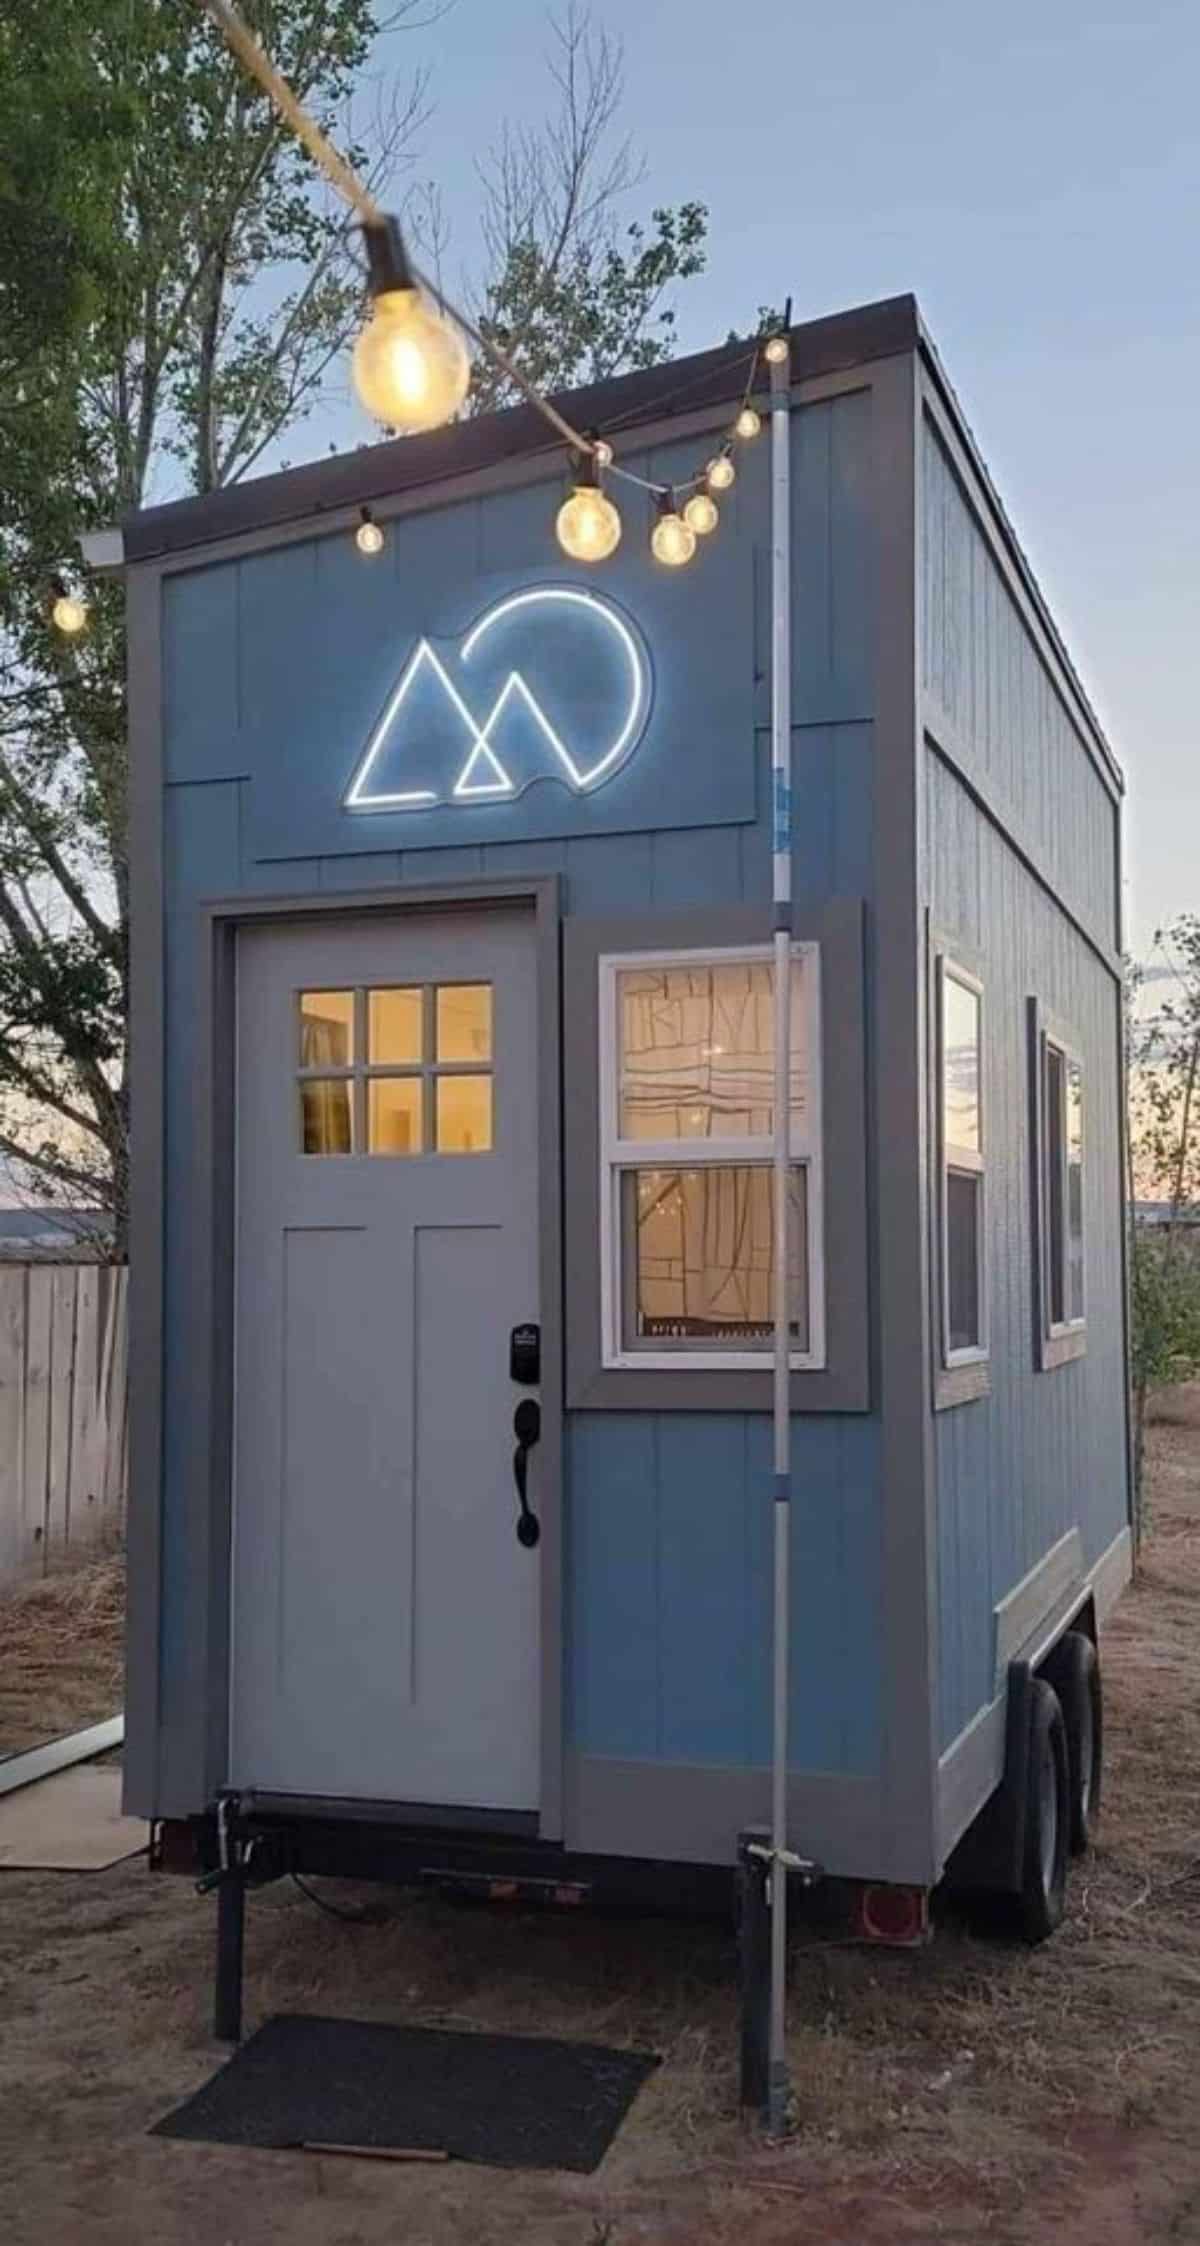 Main entrance view of 14’ compact tiny house